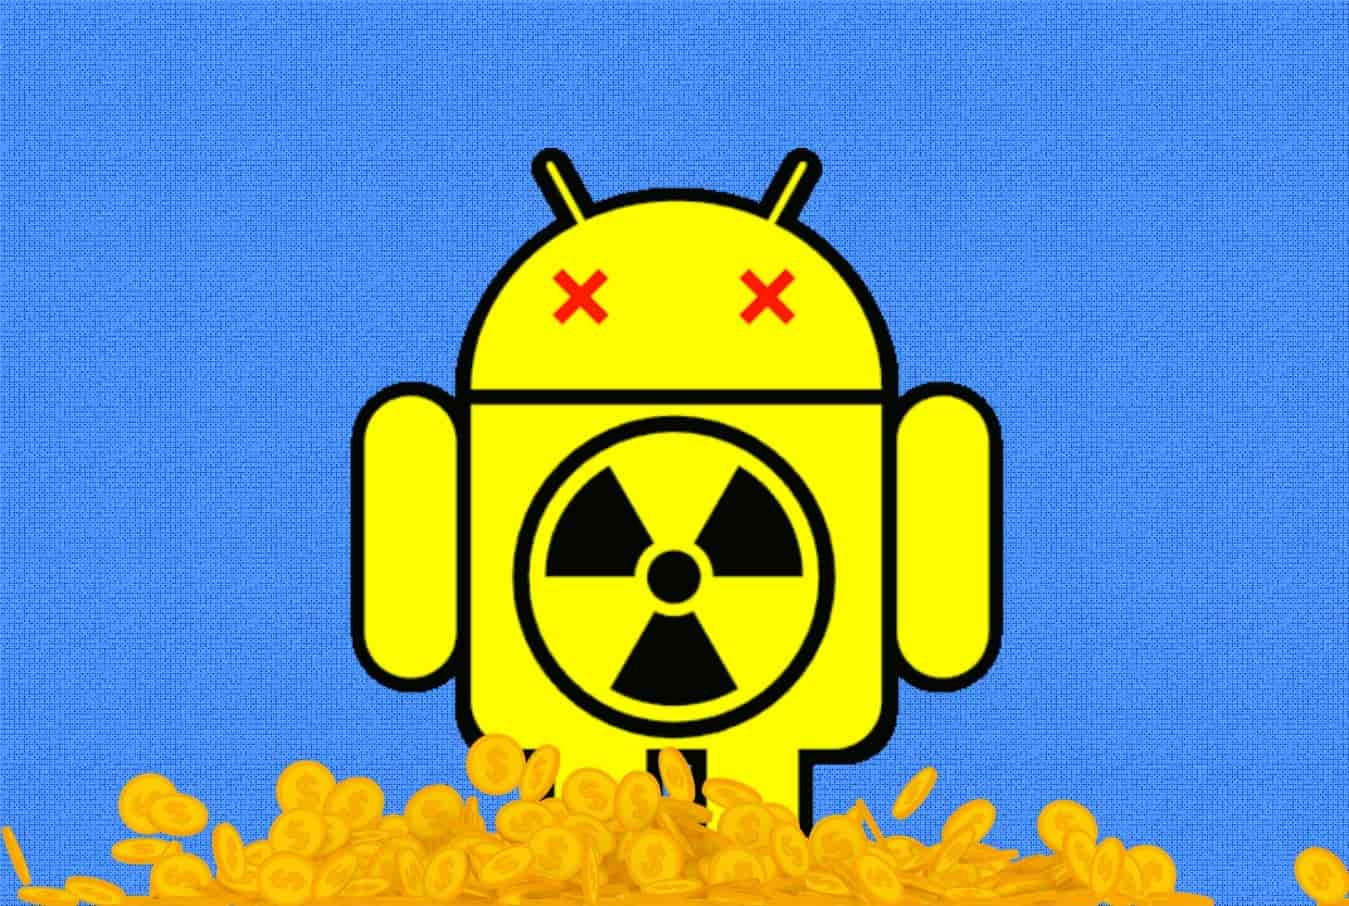 New cryptomining botnet malware hits Android devices